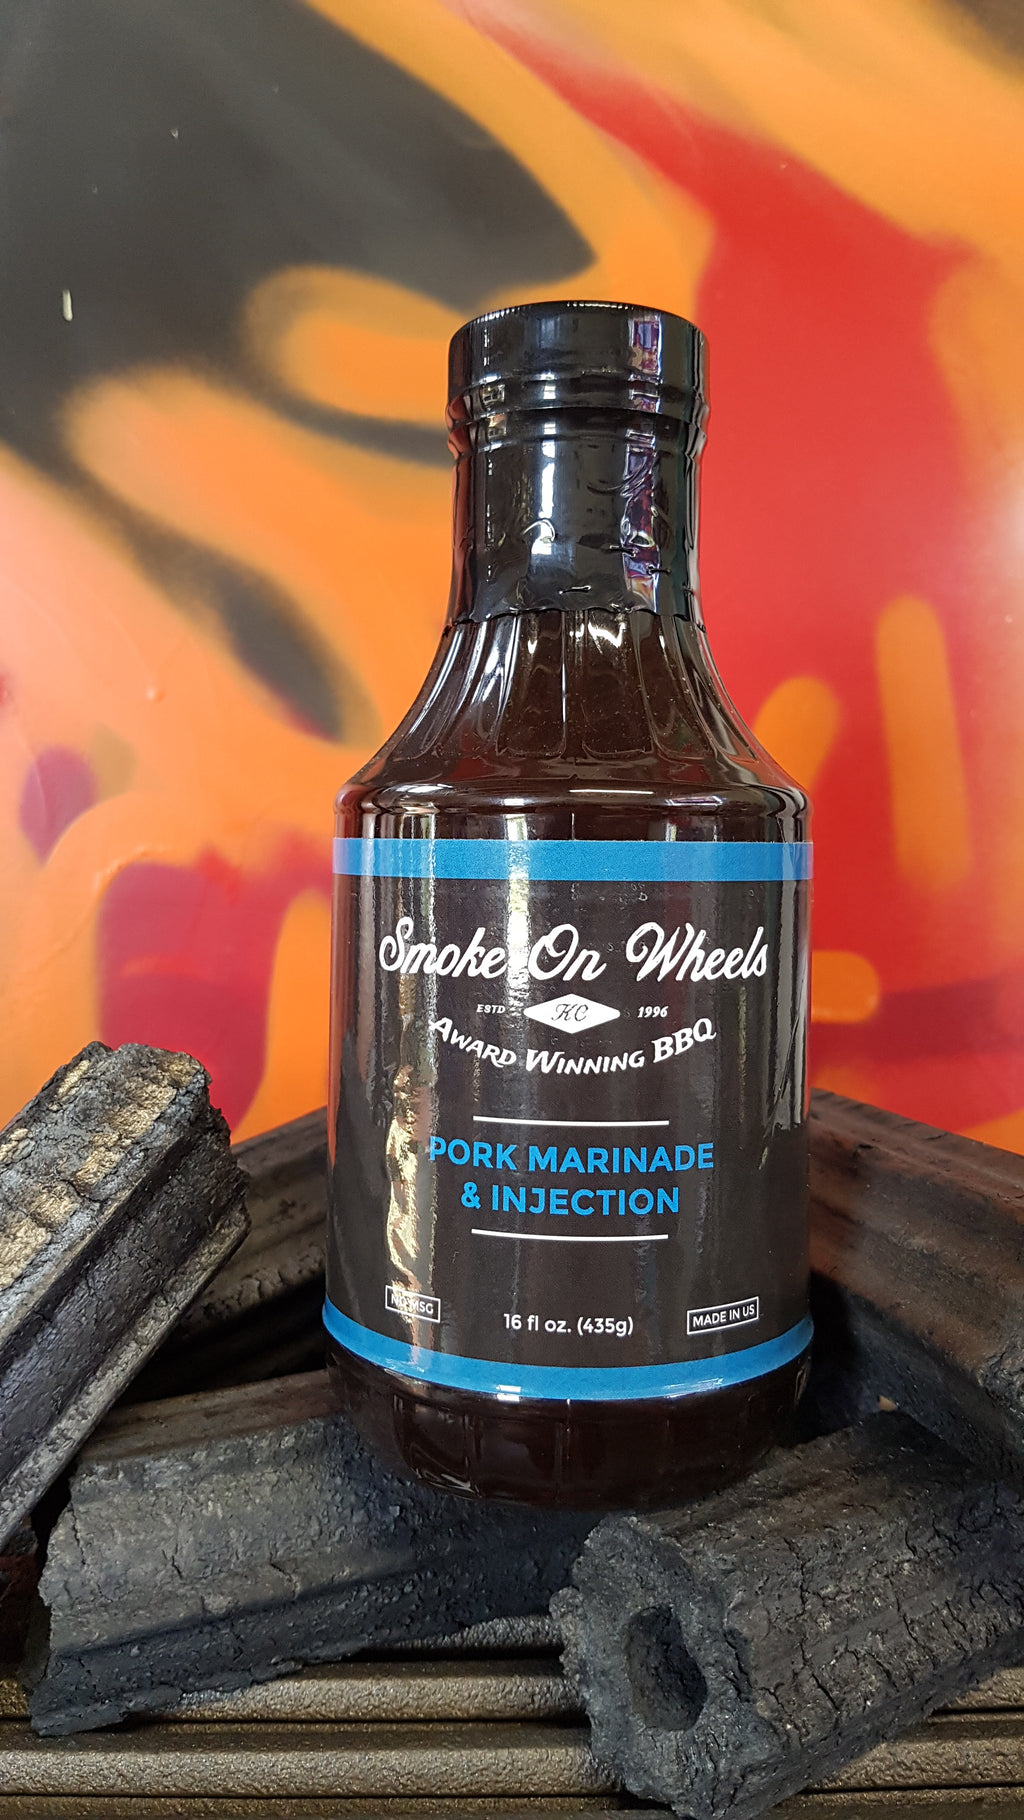 Pork Marinade & Injection 435g by Smoke On Wheels